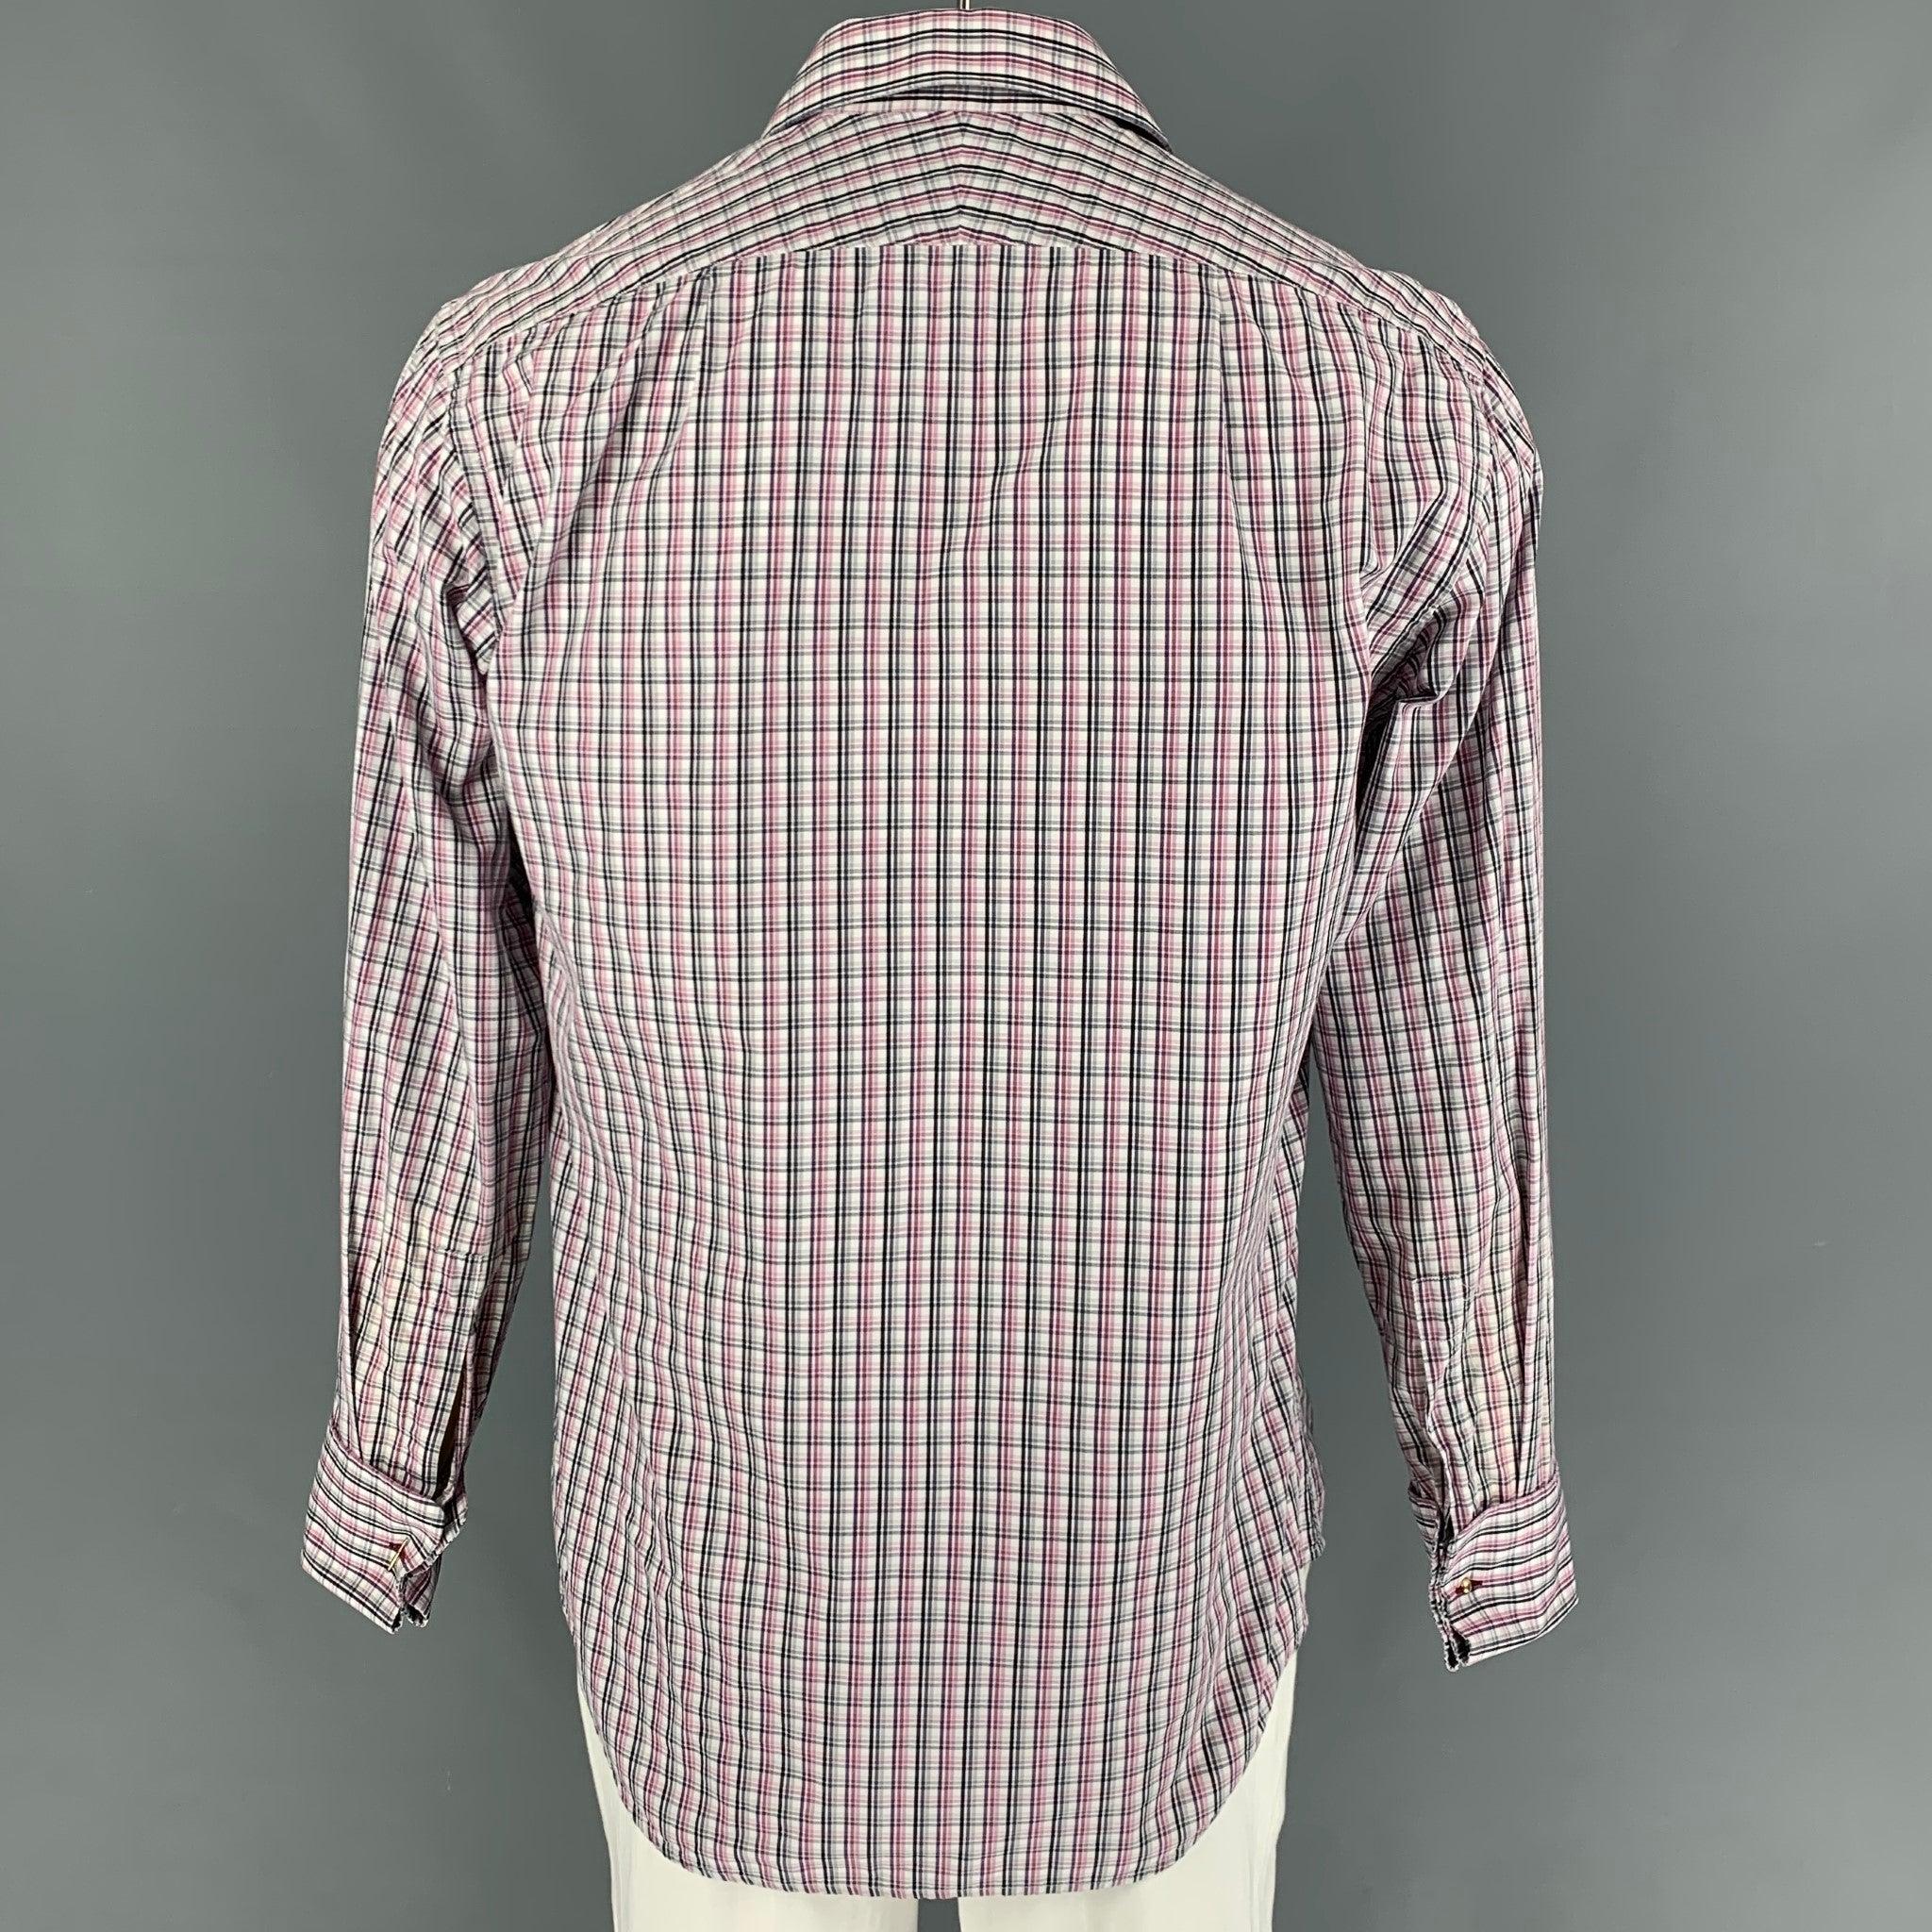 PAUL SMITH Size L White Black Burgundy Plaid Cotton Long Sleeve Shirt In Good Condition For Sale In San Francisco, CA